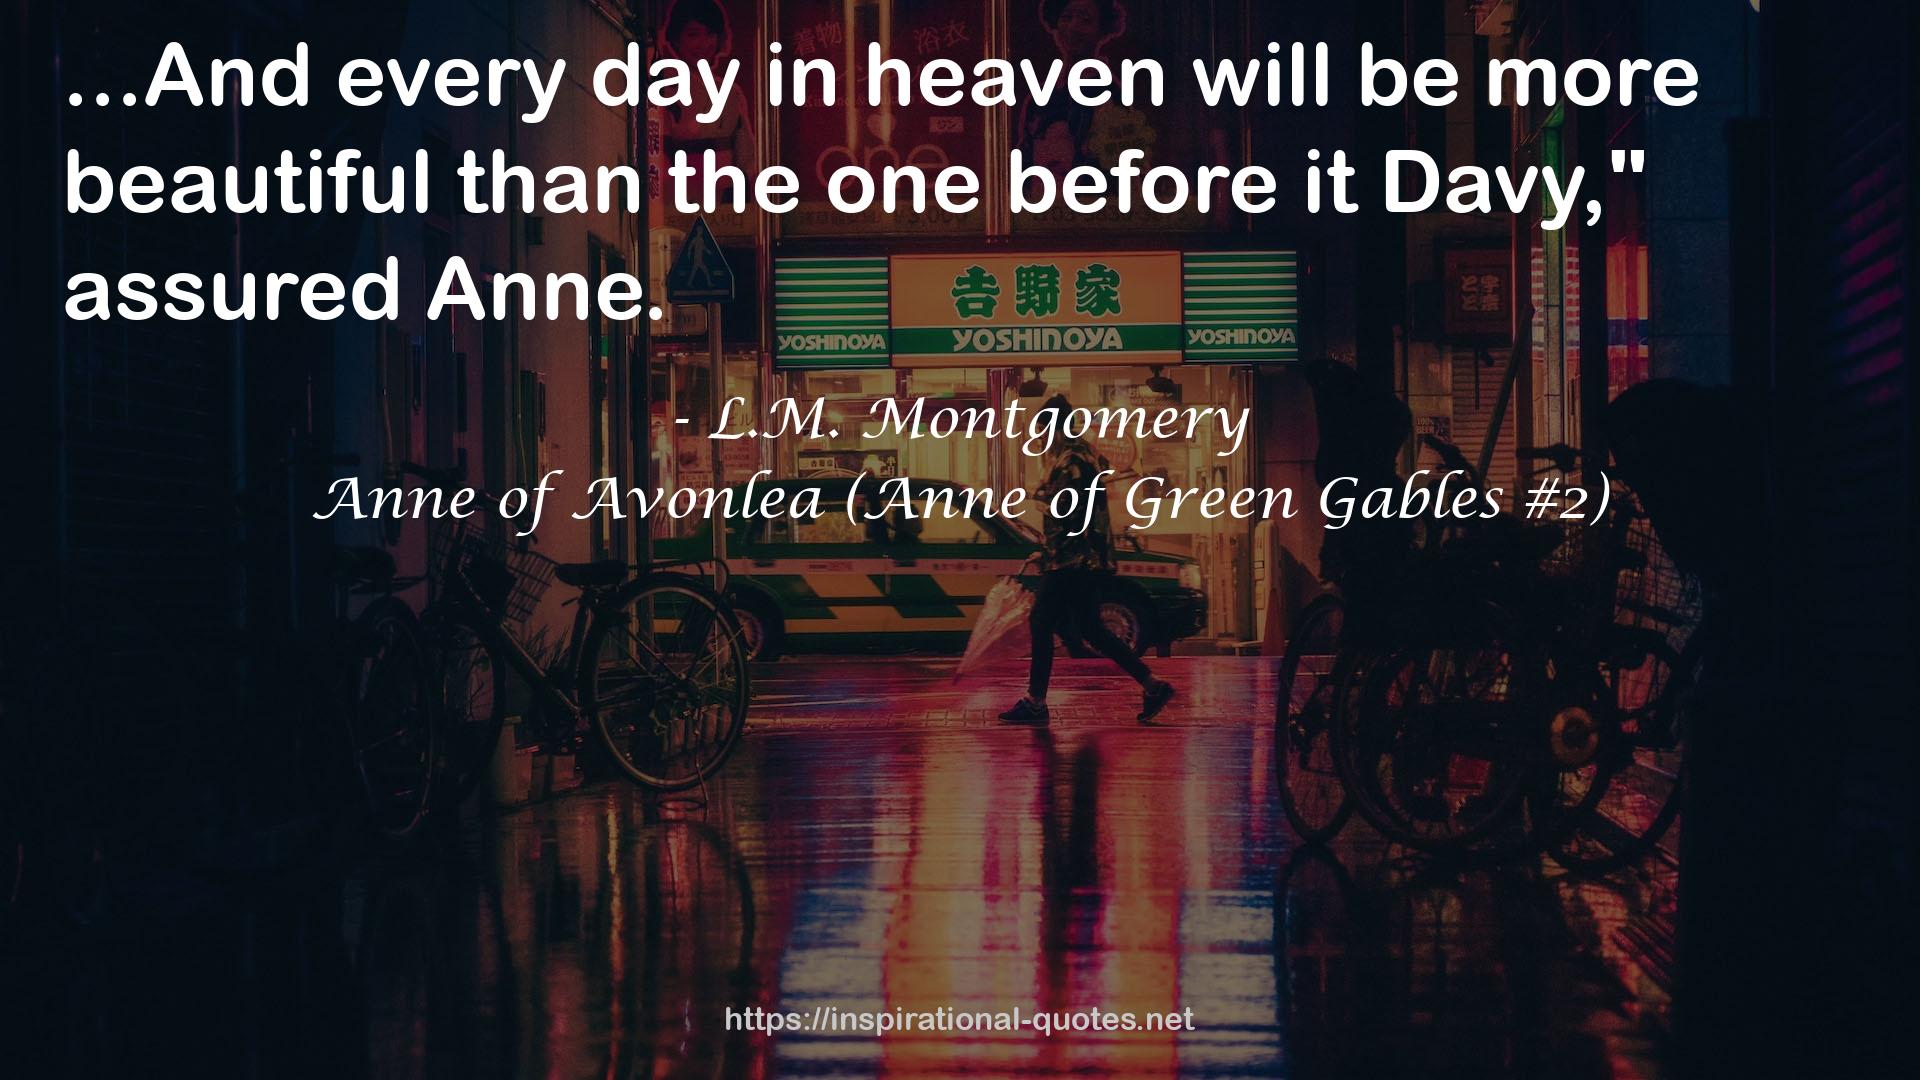 Anne of Avonlea (Anne of Green Gables #2) QUOTES